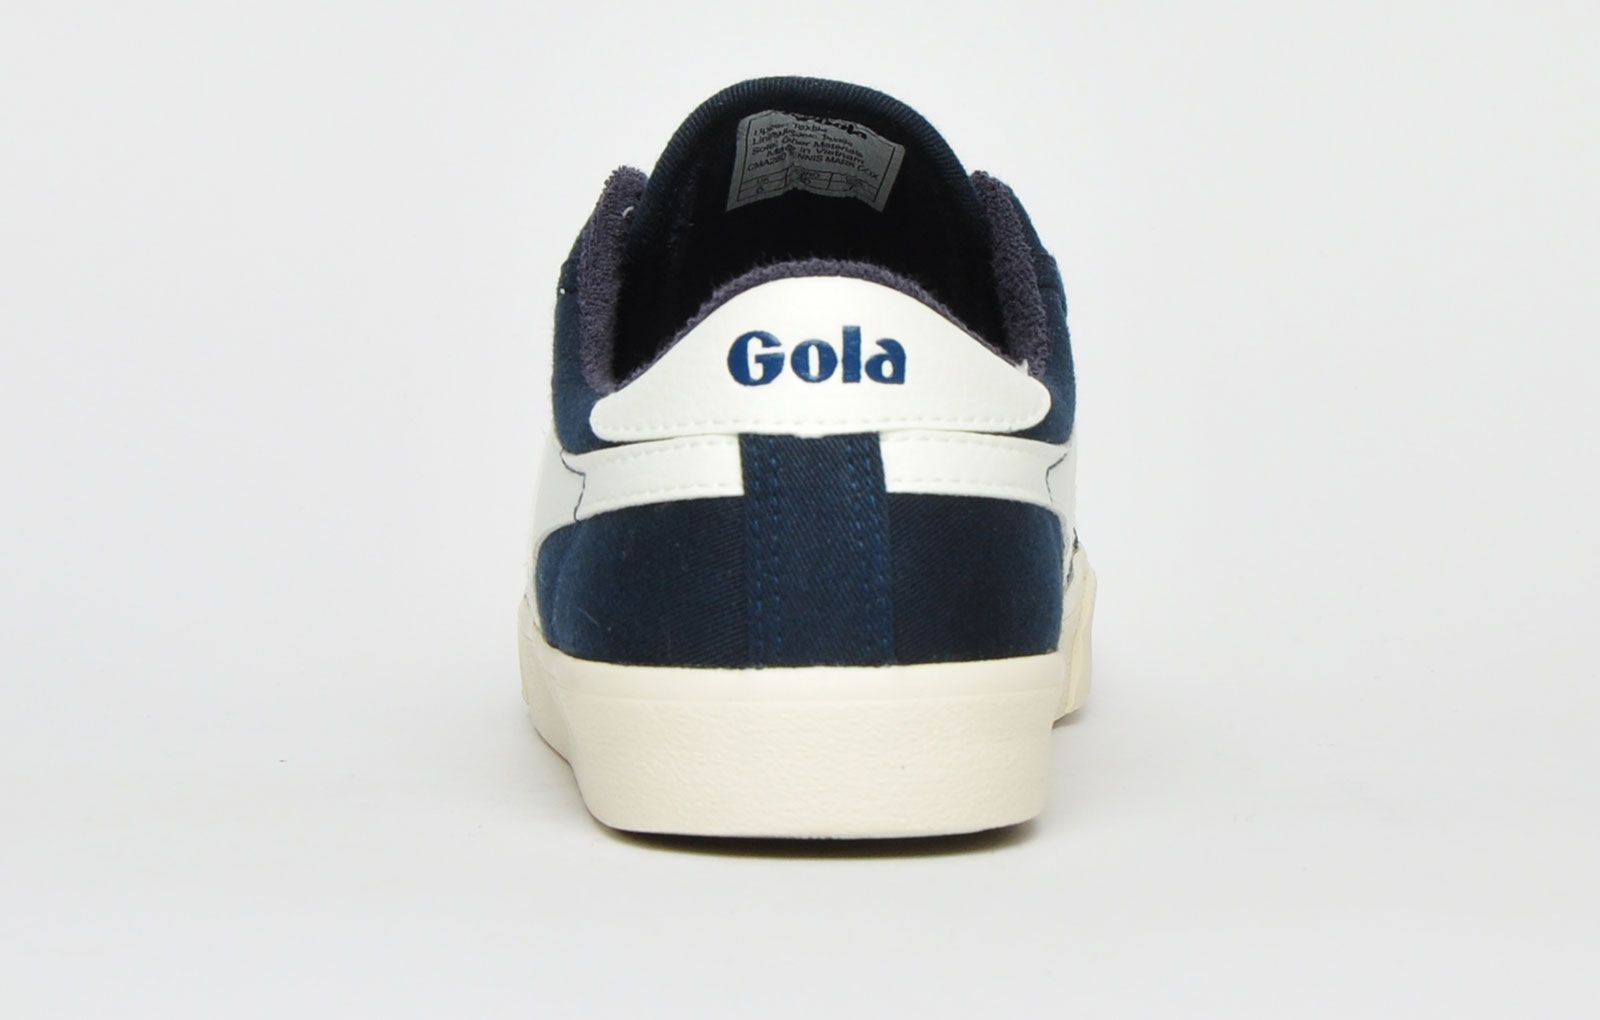 The Gola Classics Tennis Mark Cox is an update of the original Gola Tennis shoe design from 1973. Featuring a navy canvas textile upper with contrasting Gola branding and a sleek vintage styled sole to give a clean and fresh look. Offering enhanced comfort with a padded soft brushed lining and padded insole, its versatile style can be teamed with a variety of looks to add a relaxed touch to any outfit. <p>- Retro style trainers</p> <p>- Vegan Friendly</p> <p>- Soft lining for additional comfort</p> <p> - Premium canvas textile upper</p> <p>- Lace-up closure</p> <p>- Gola Classics branding throughout</p>